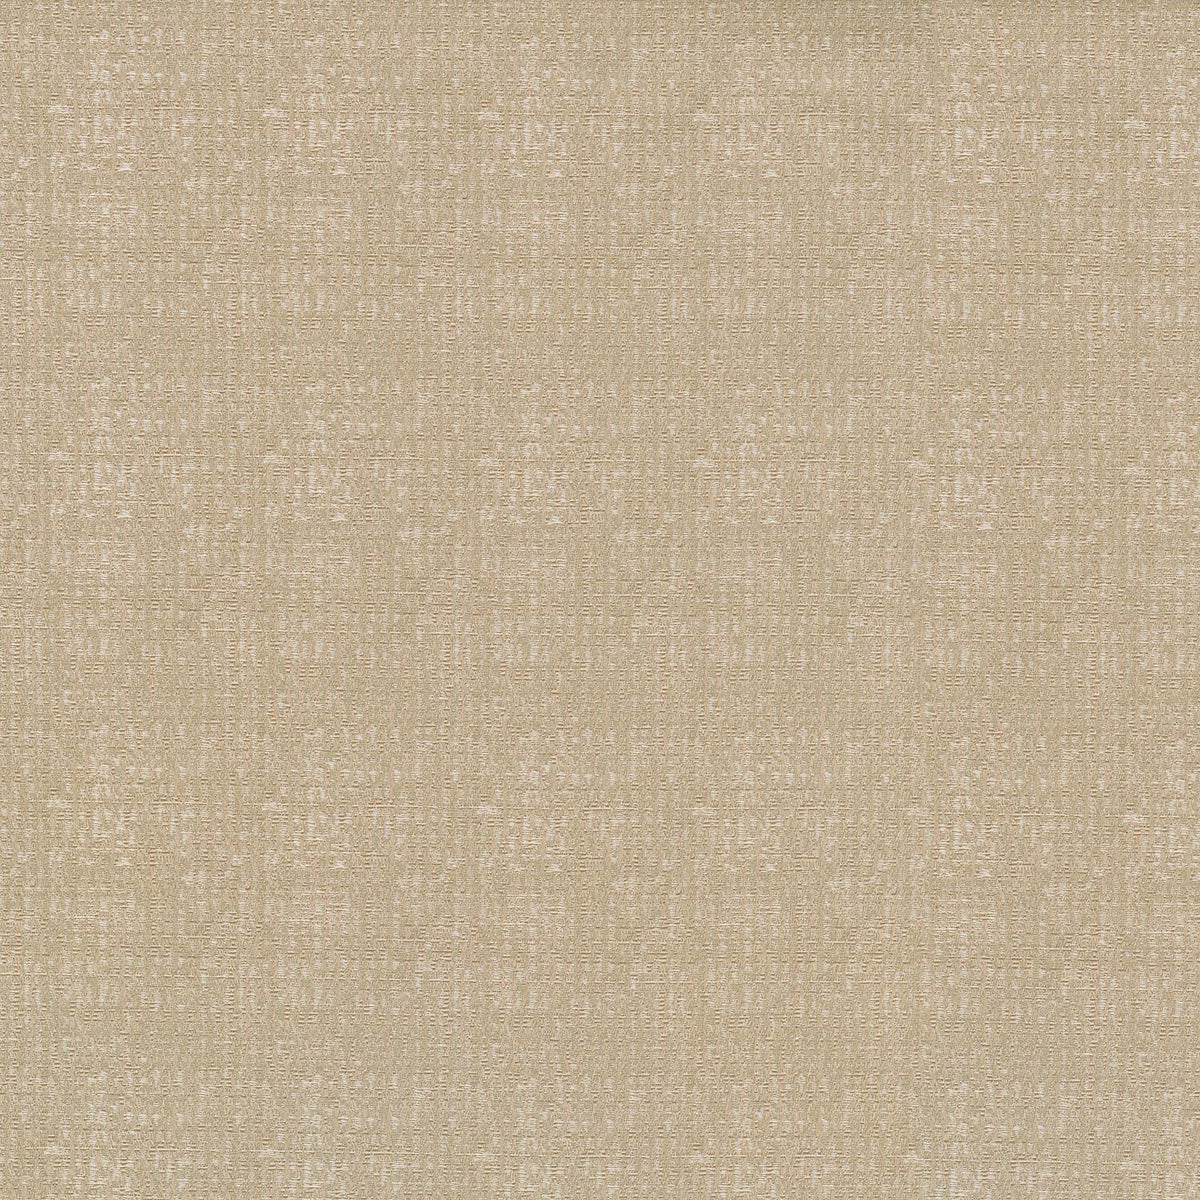 P/K Lifestyles Odette - Cameo 409954 Fabric Swatch